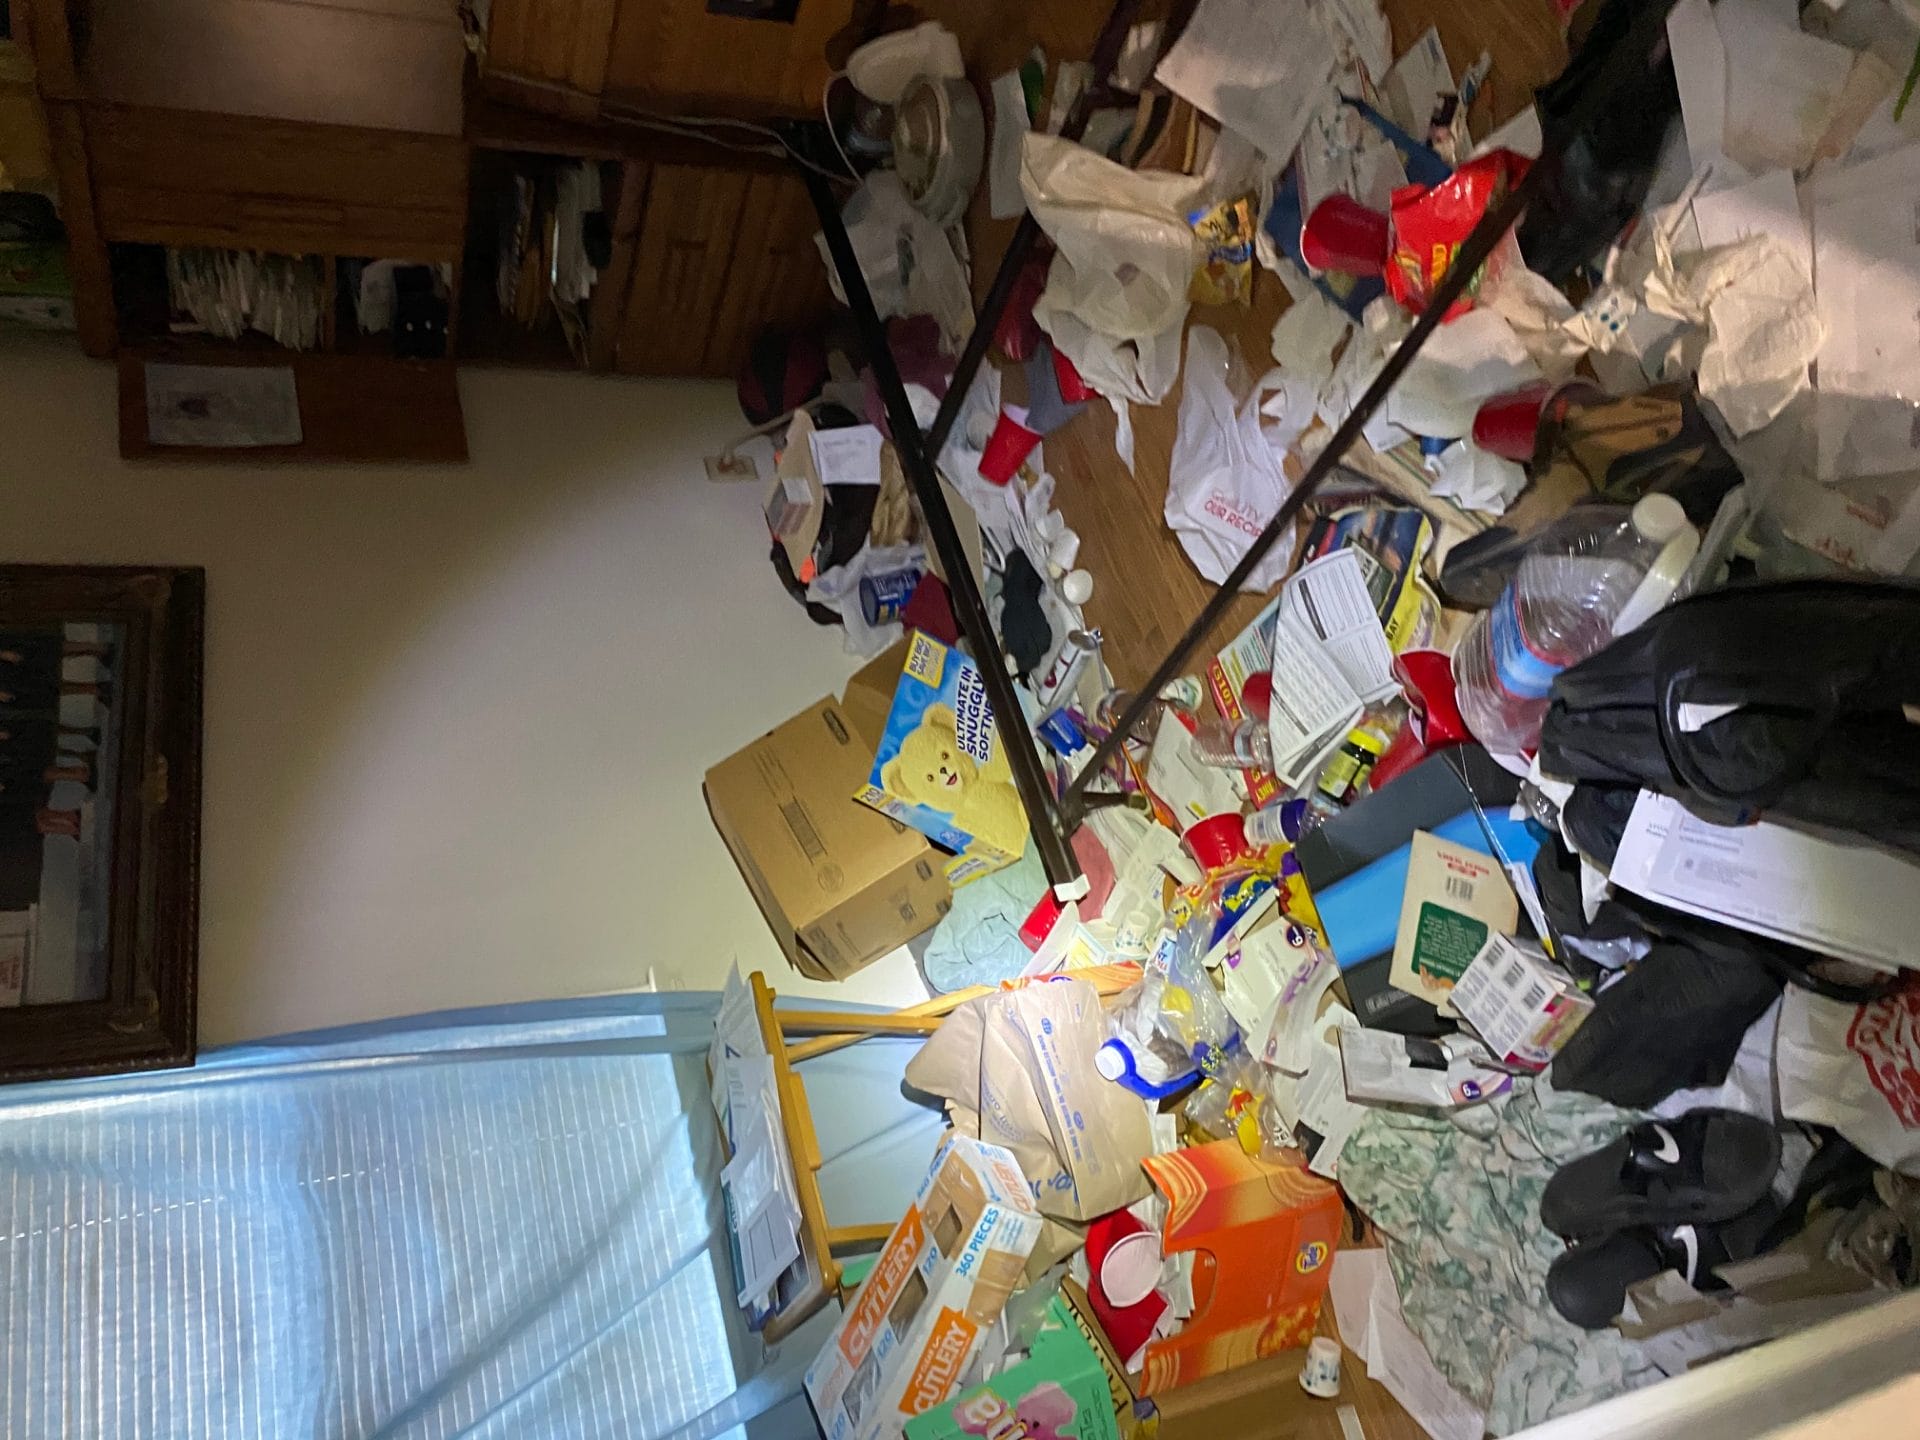 Image shows a bedroom blocked by trash and clutter. It's impossible to walk into the room. 